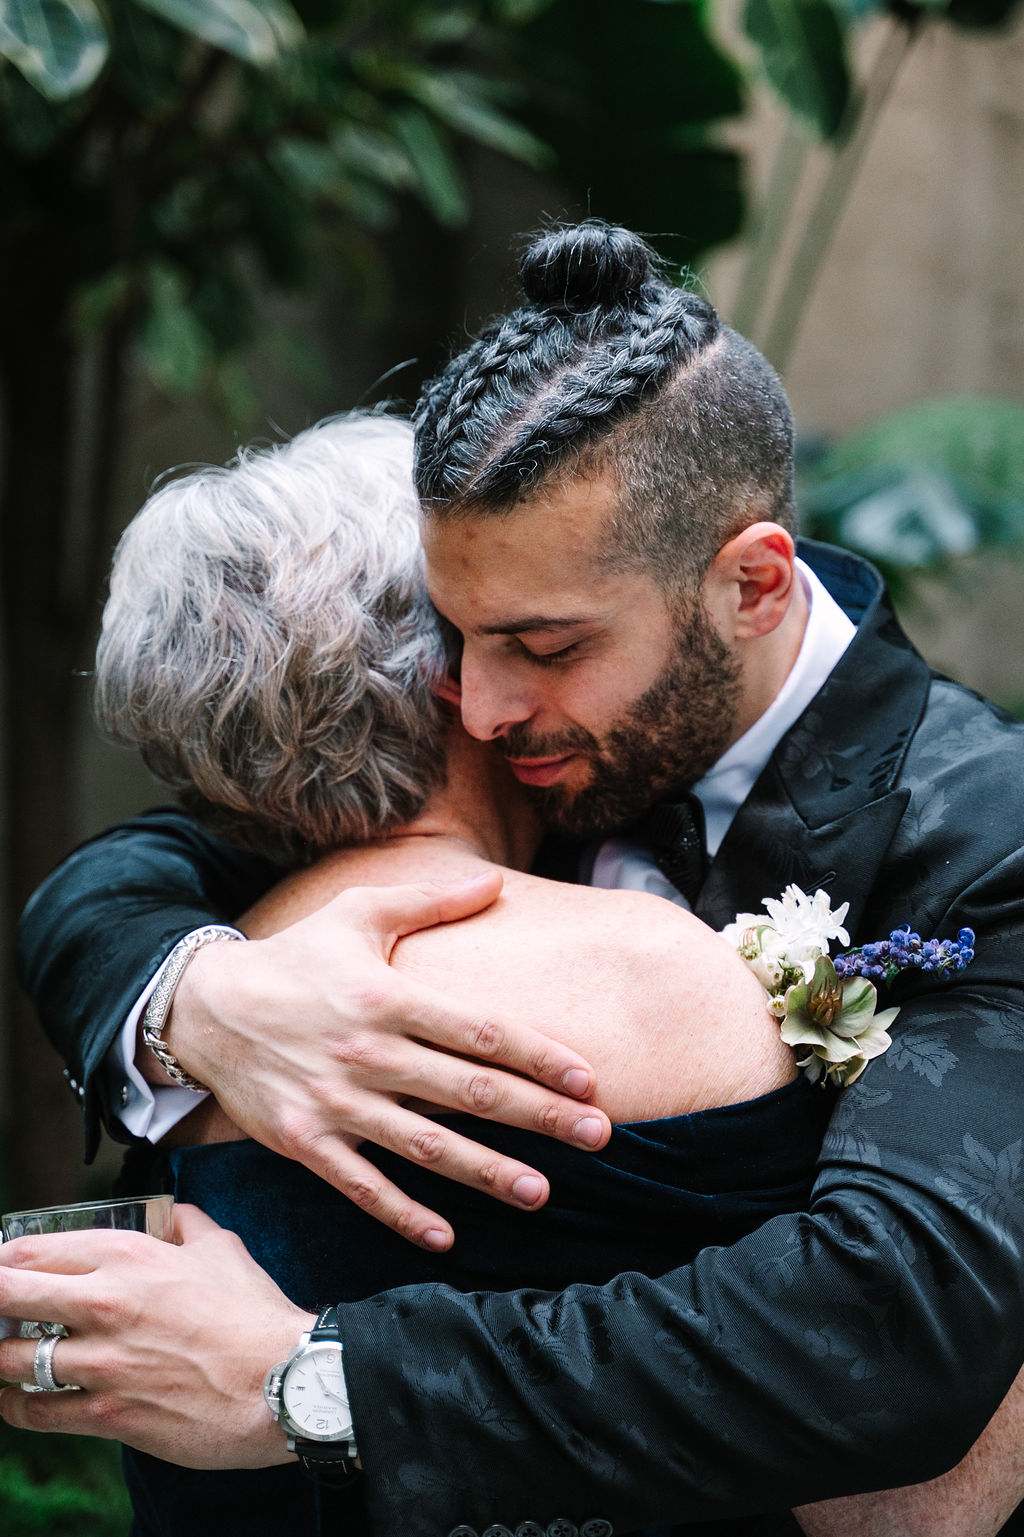 groom and mother hug after wedding ceremony emotional candid classy black satin suit with floral details delicate white florals with pop of sage green and blue